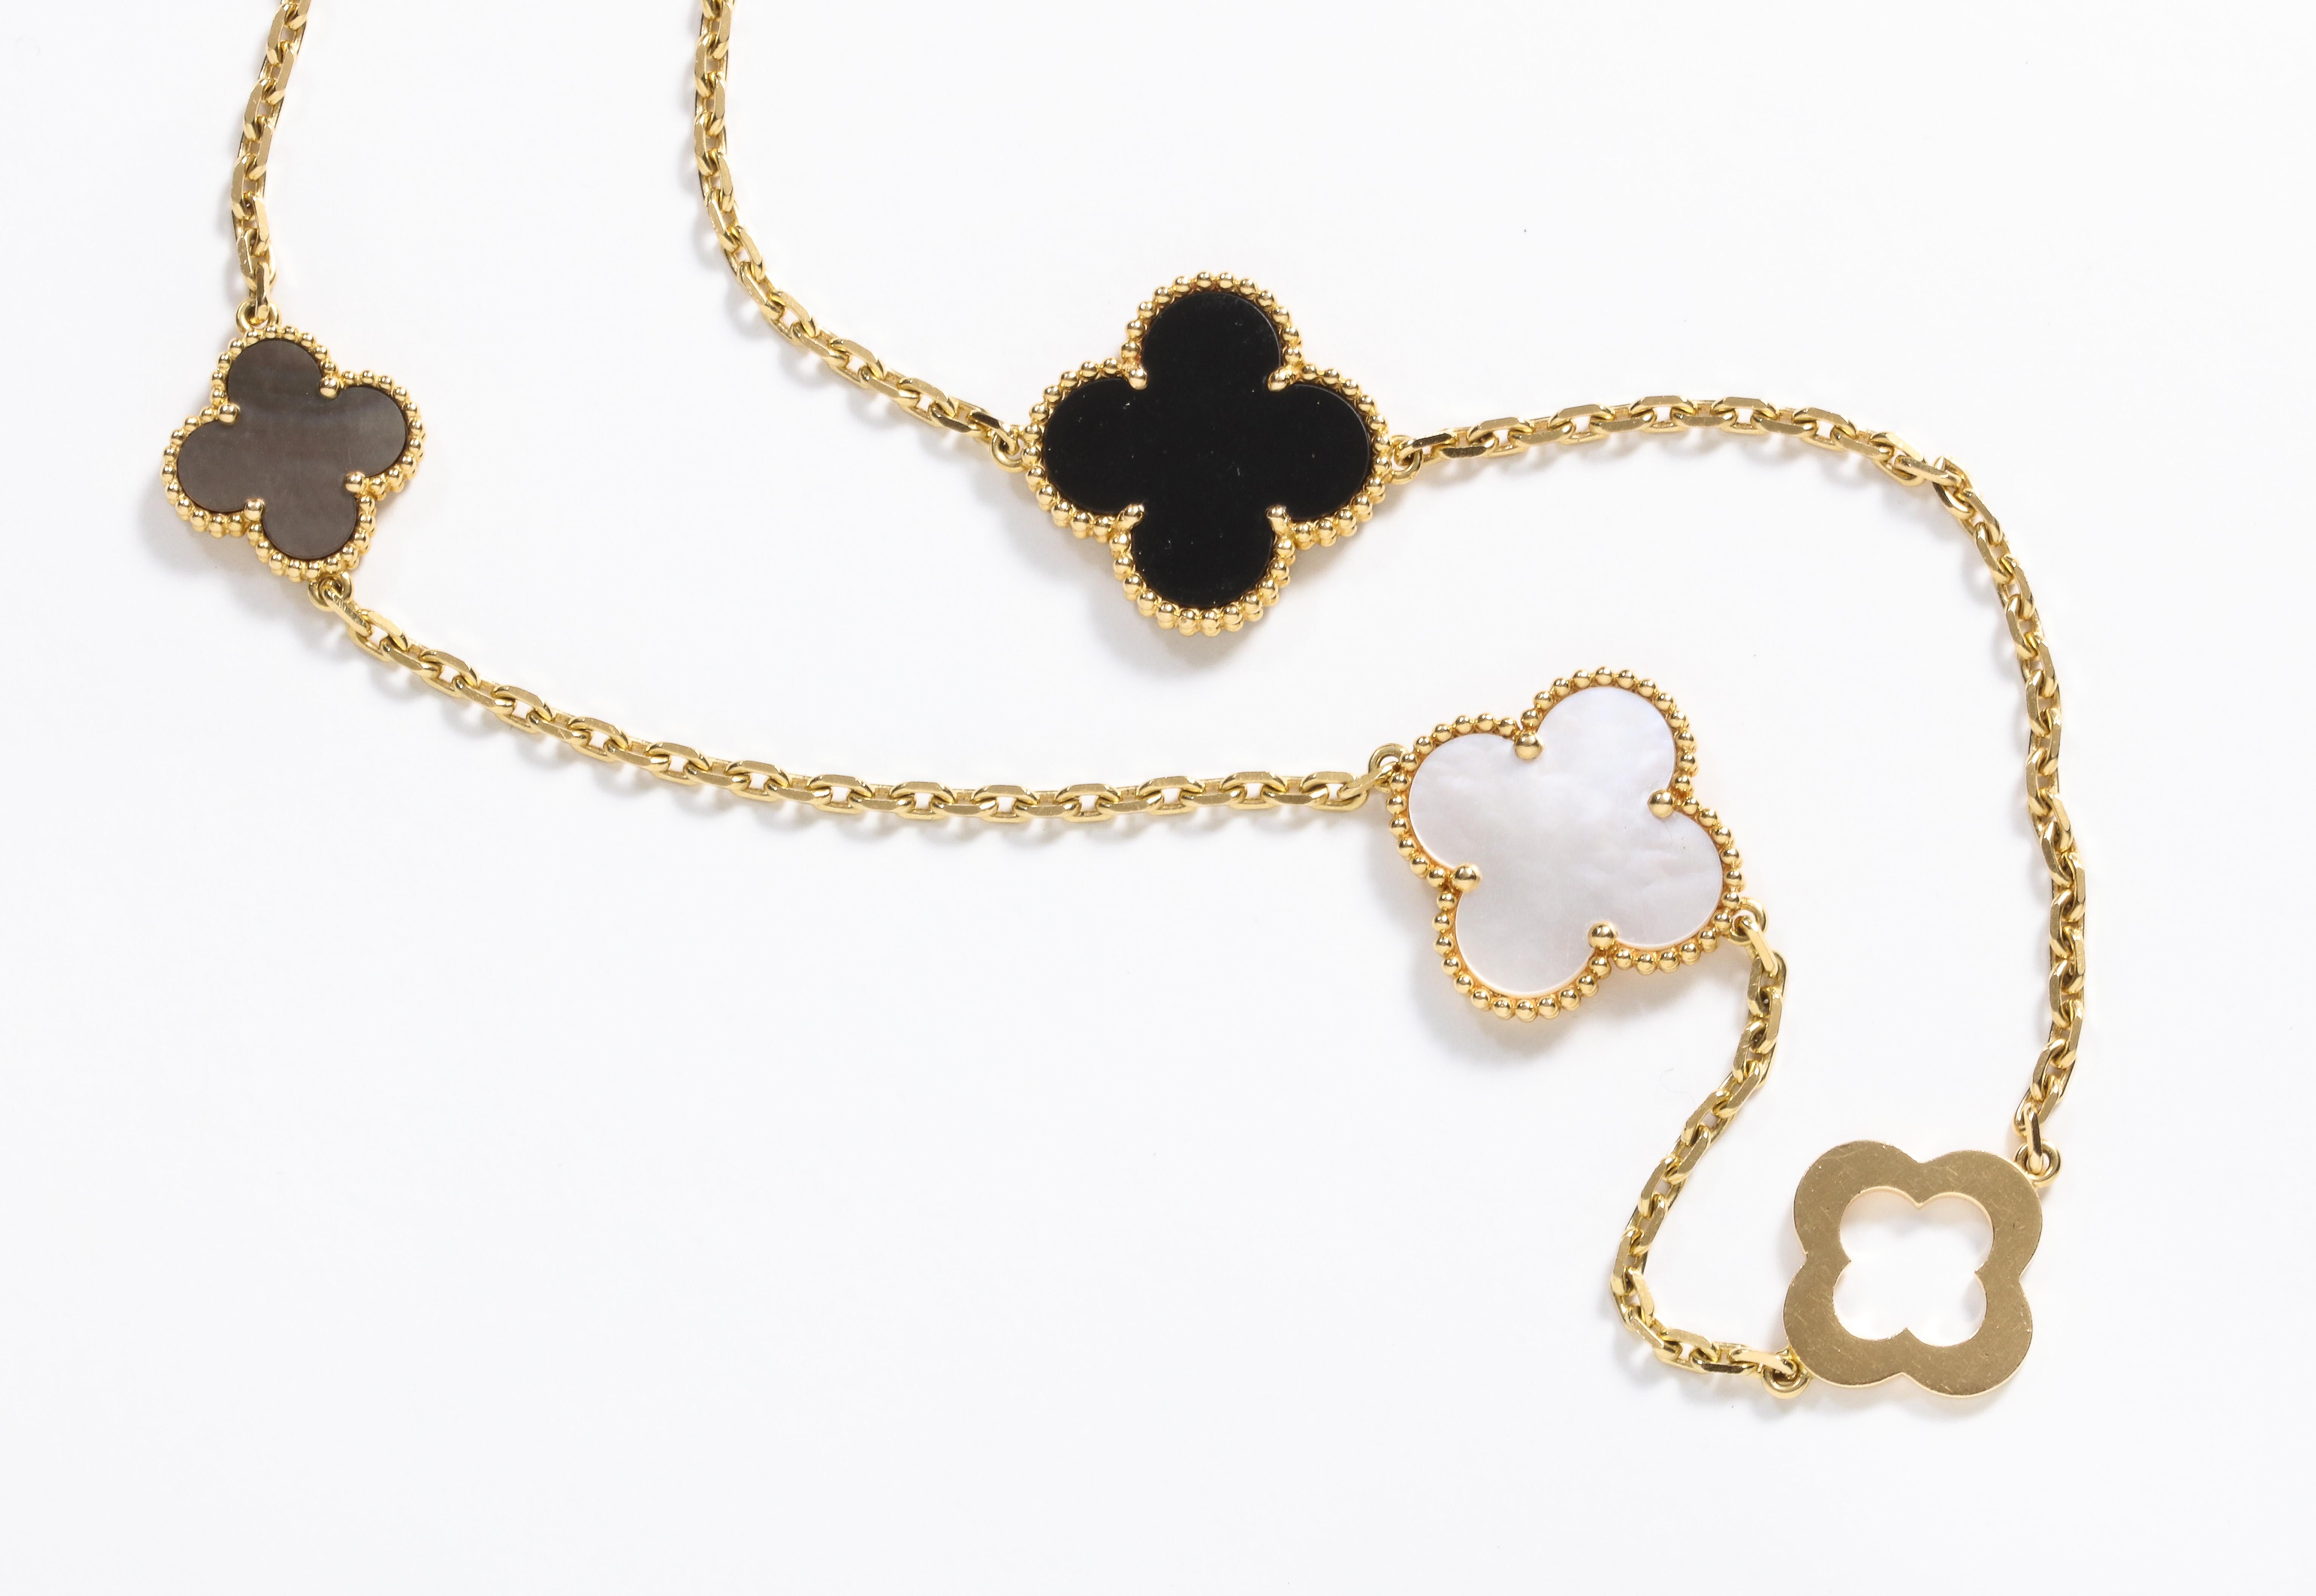 Van Cleef & Arpels & Chloe, a Rare, Limited-Edition 18K Gold Alhambra Necklace 2